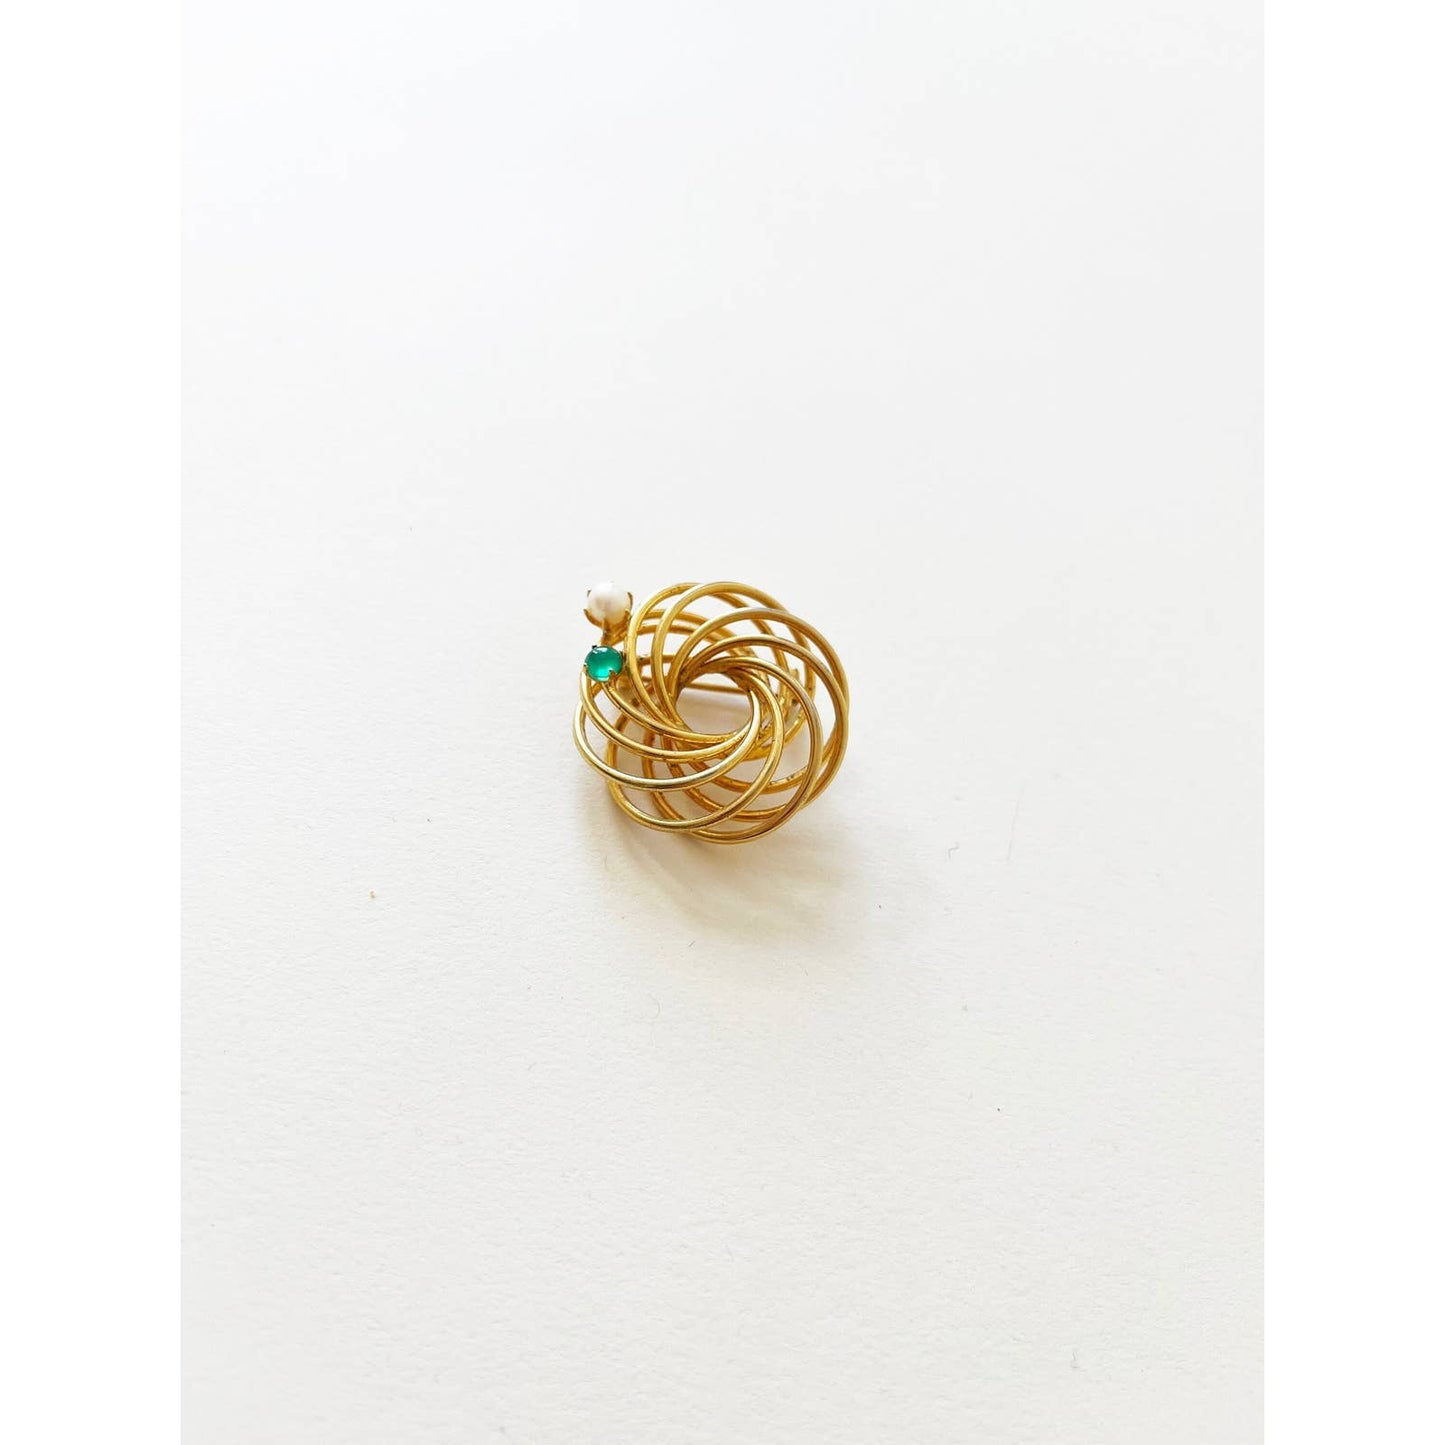 Vintage Gold Swirl Brooch with Pearl and Green Stone